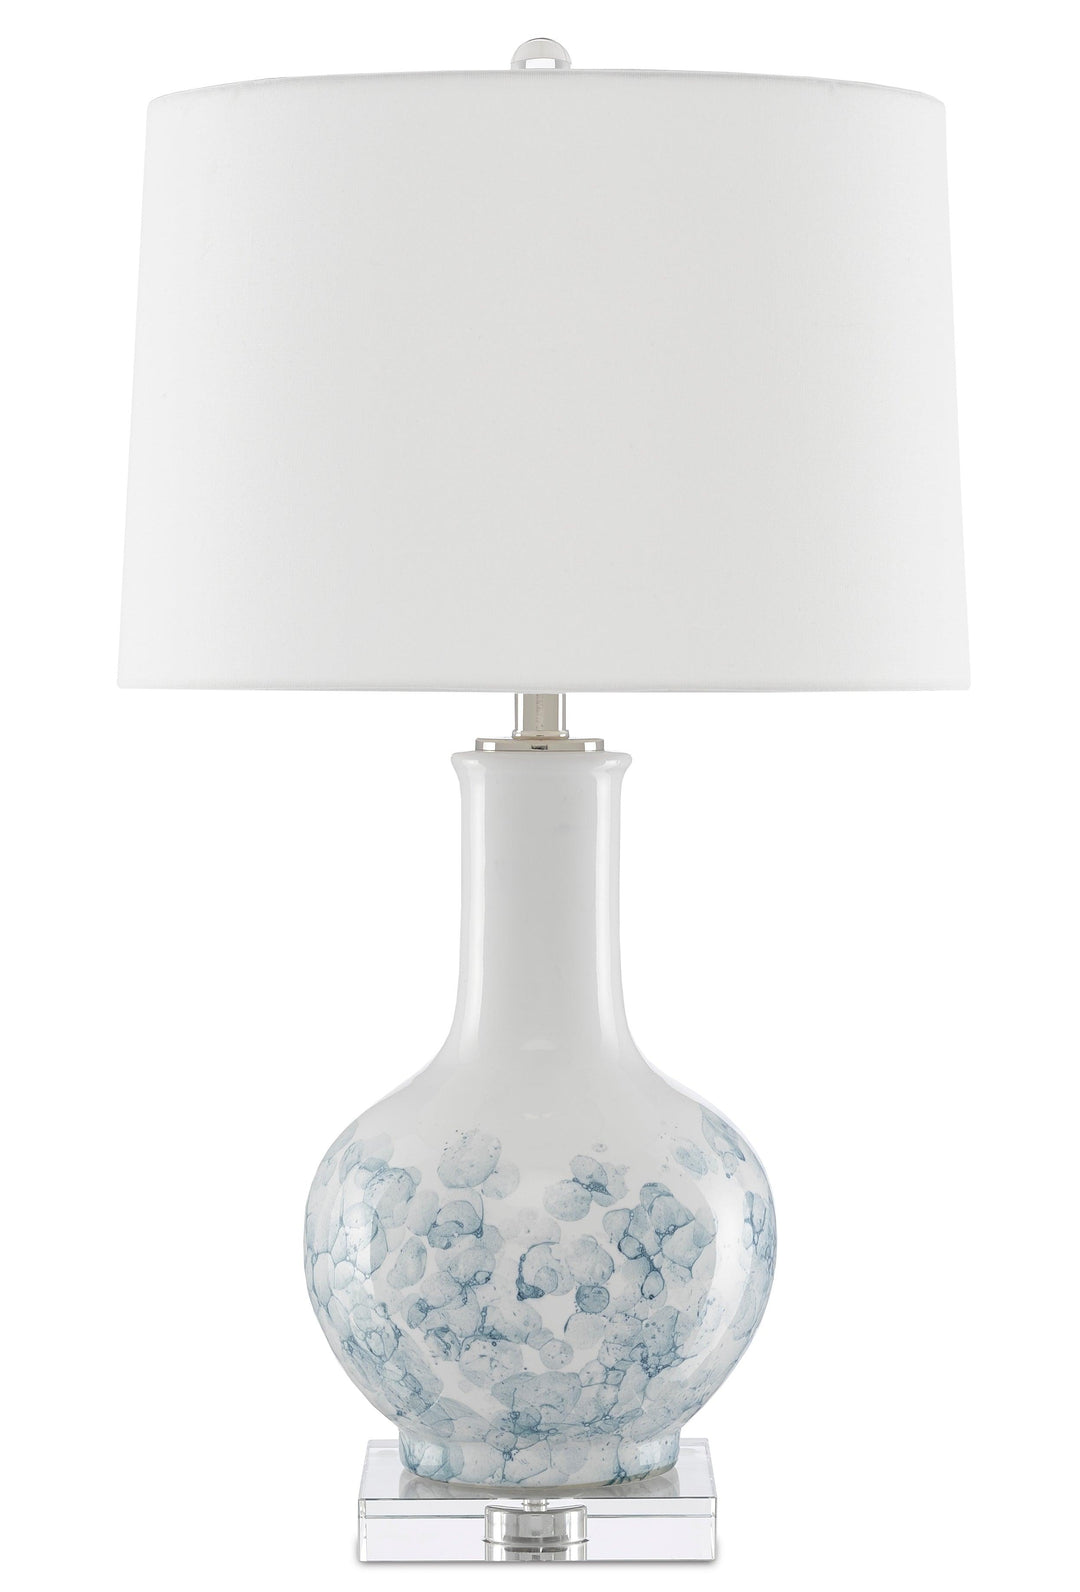 Myrtle Table Lamp - Casey & Company